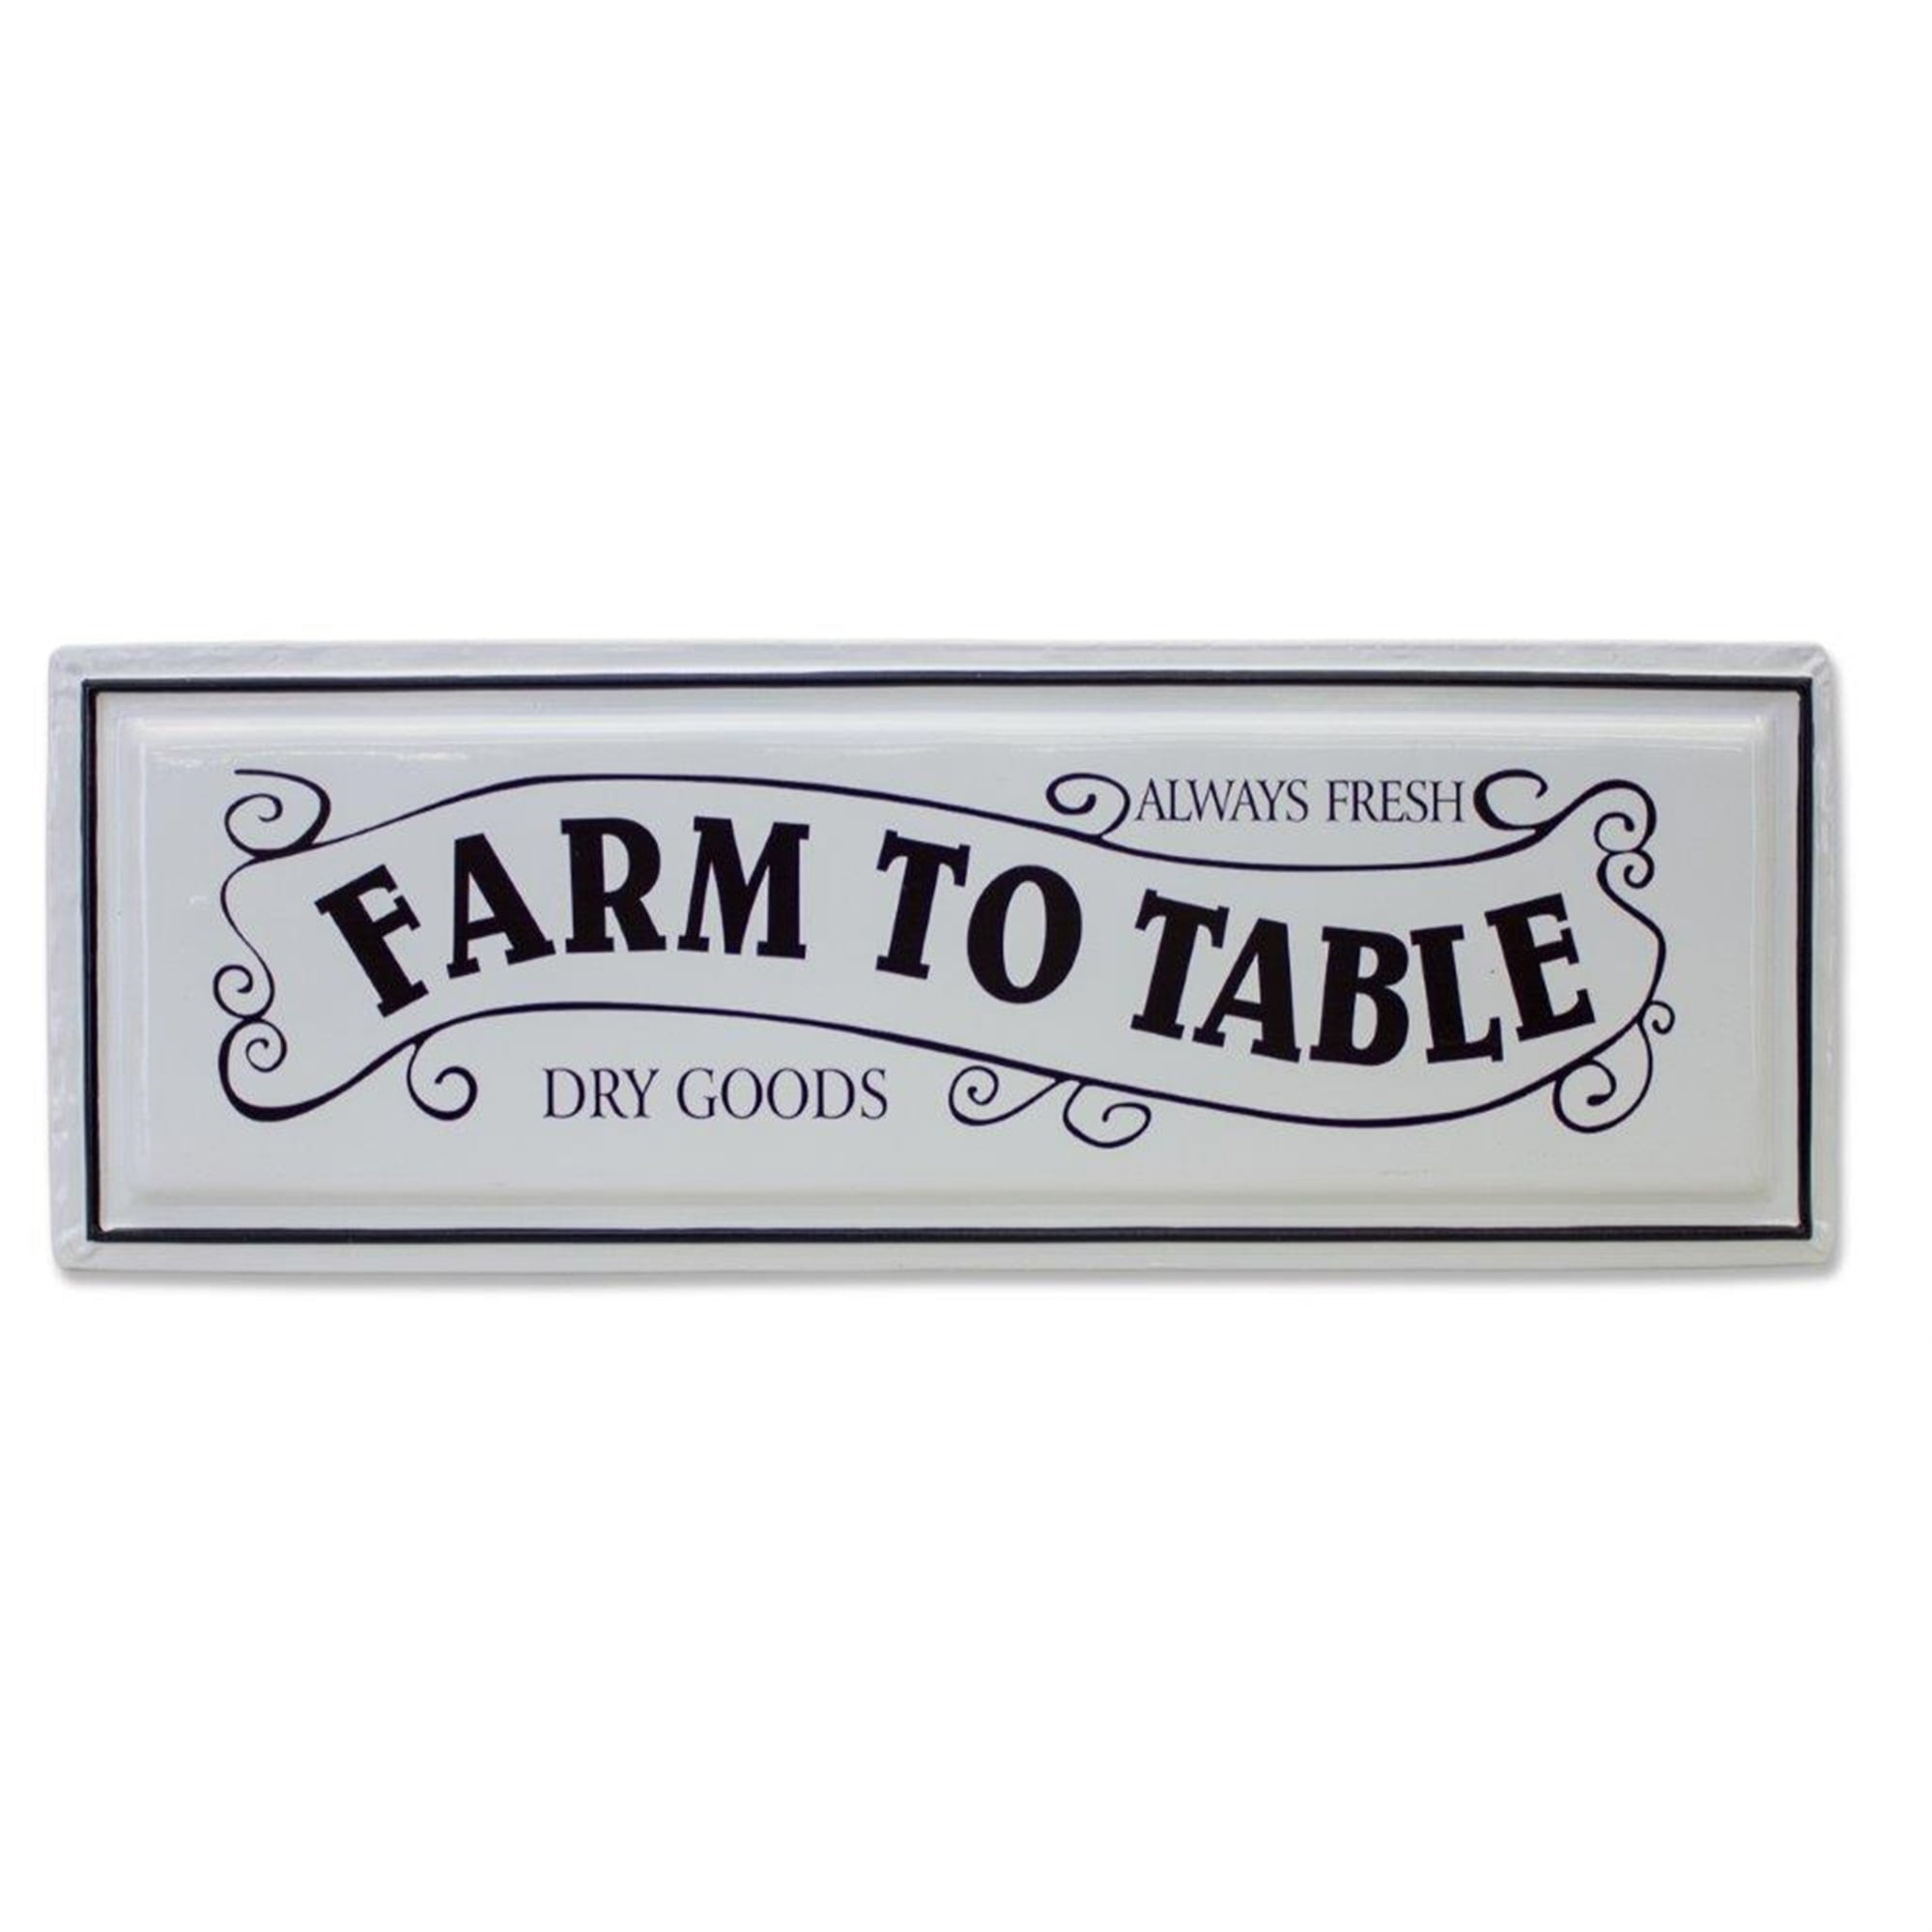 Farm To Table Sign 24.25"L x 8.5"H Iron